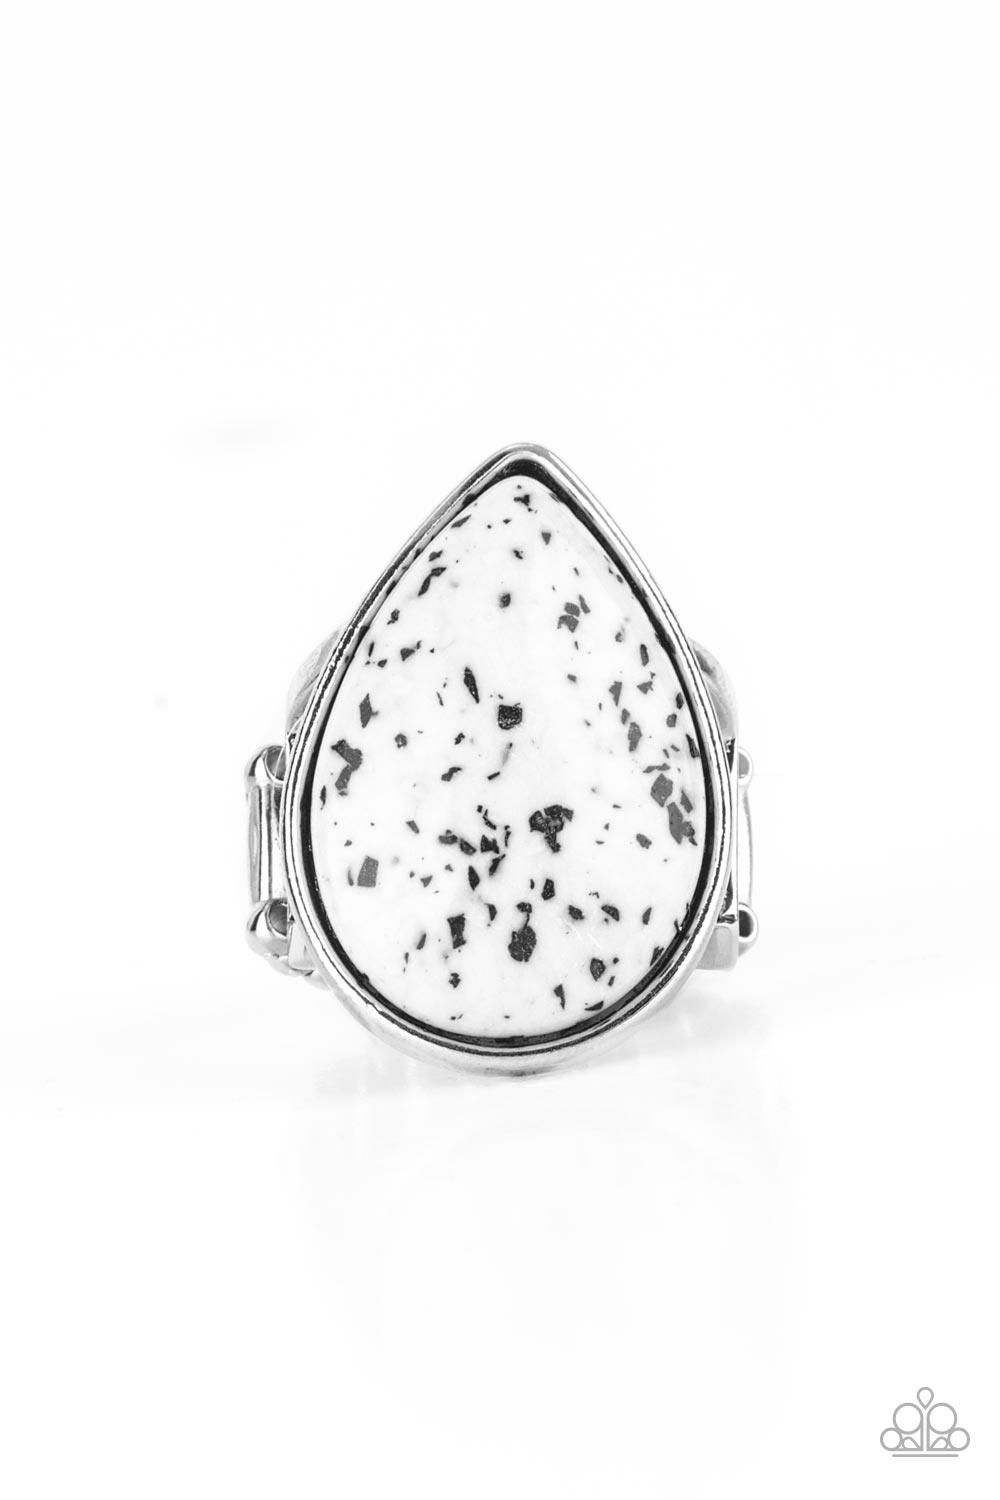 Paparazzi Accessories Stormy Sunrise - White A generous polished white stone infused with black flecks is encased in a simple silver teardrop frame resulting in a seasonal finish atop the finger. Features a stretchy band for a flexible fit. Sold as one in